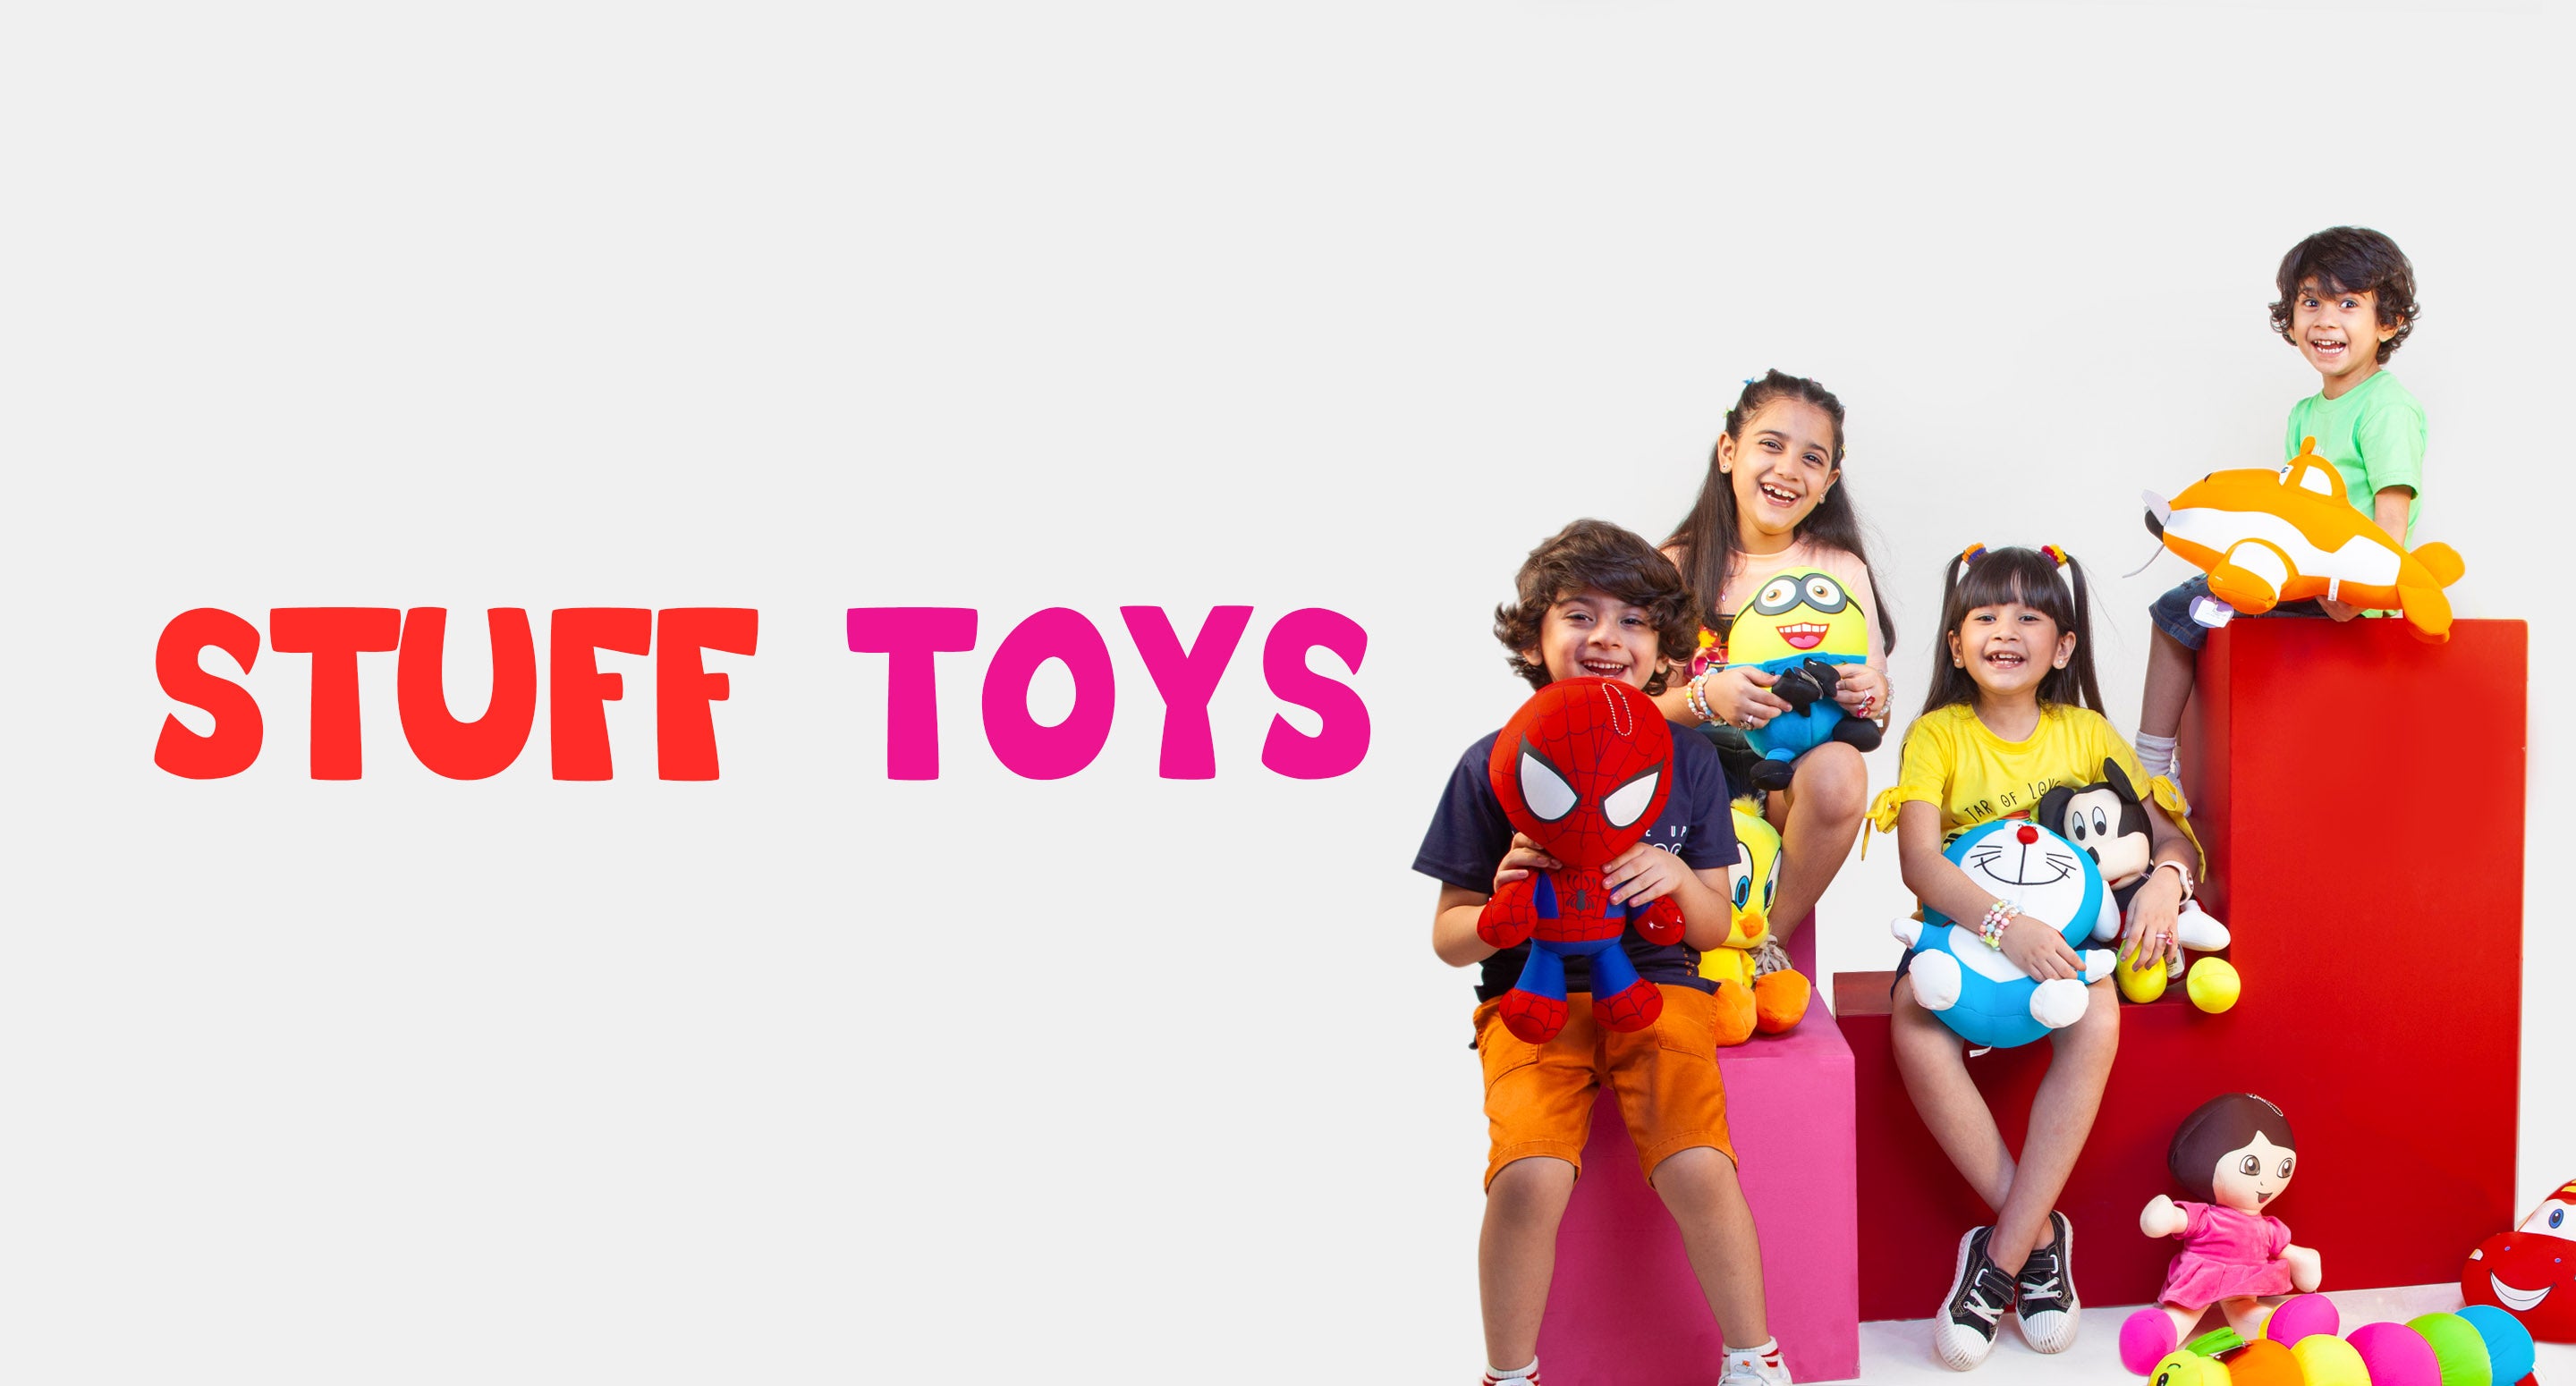 Buy Rattle Toys Online in Pakistan at Mama Love